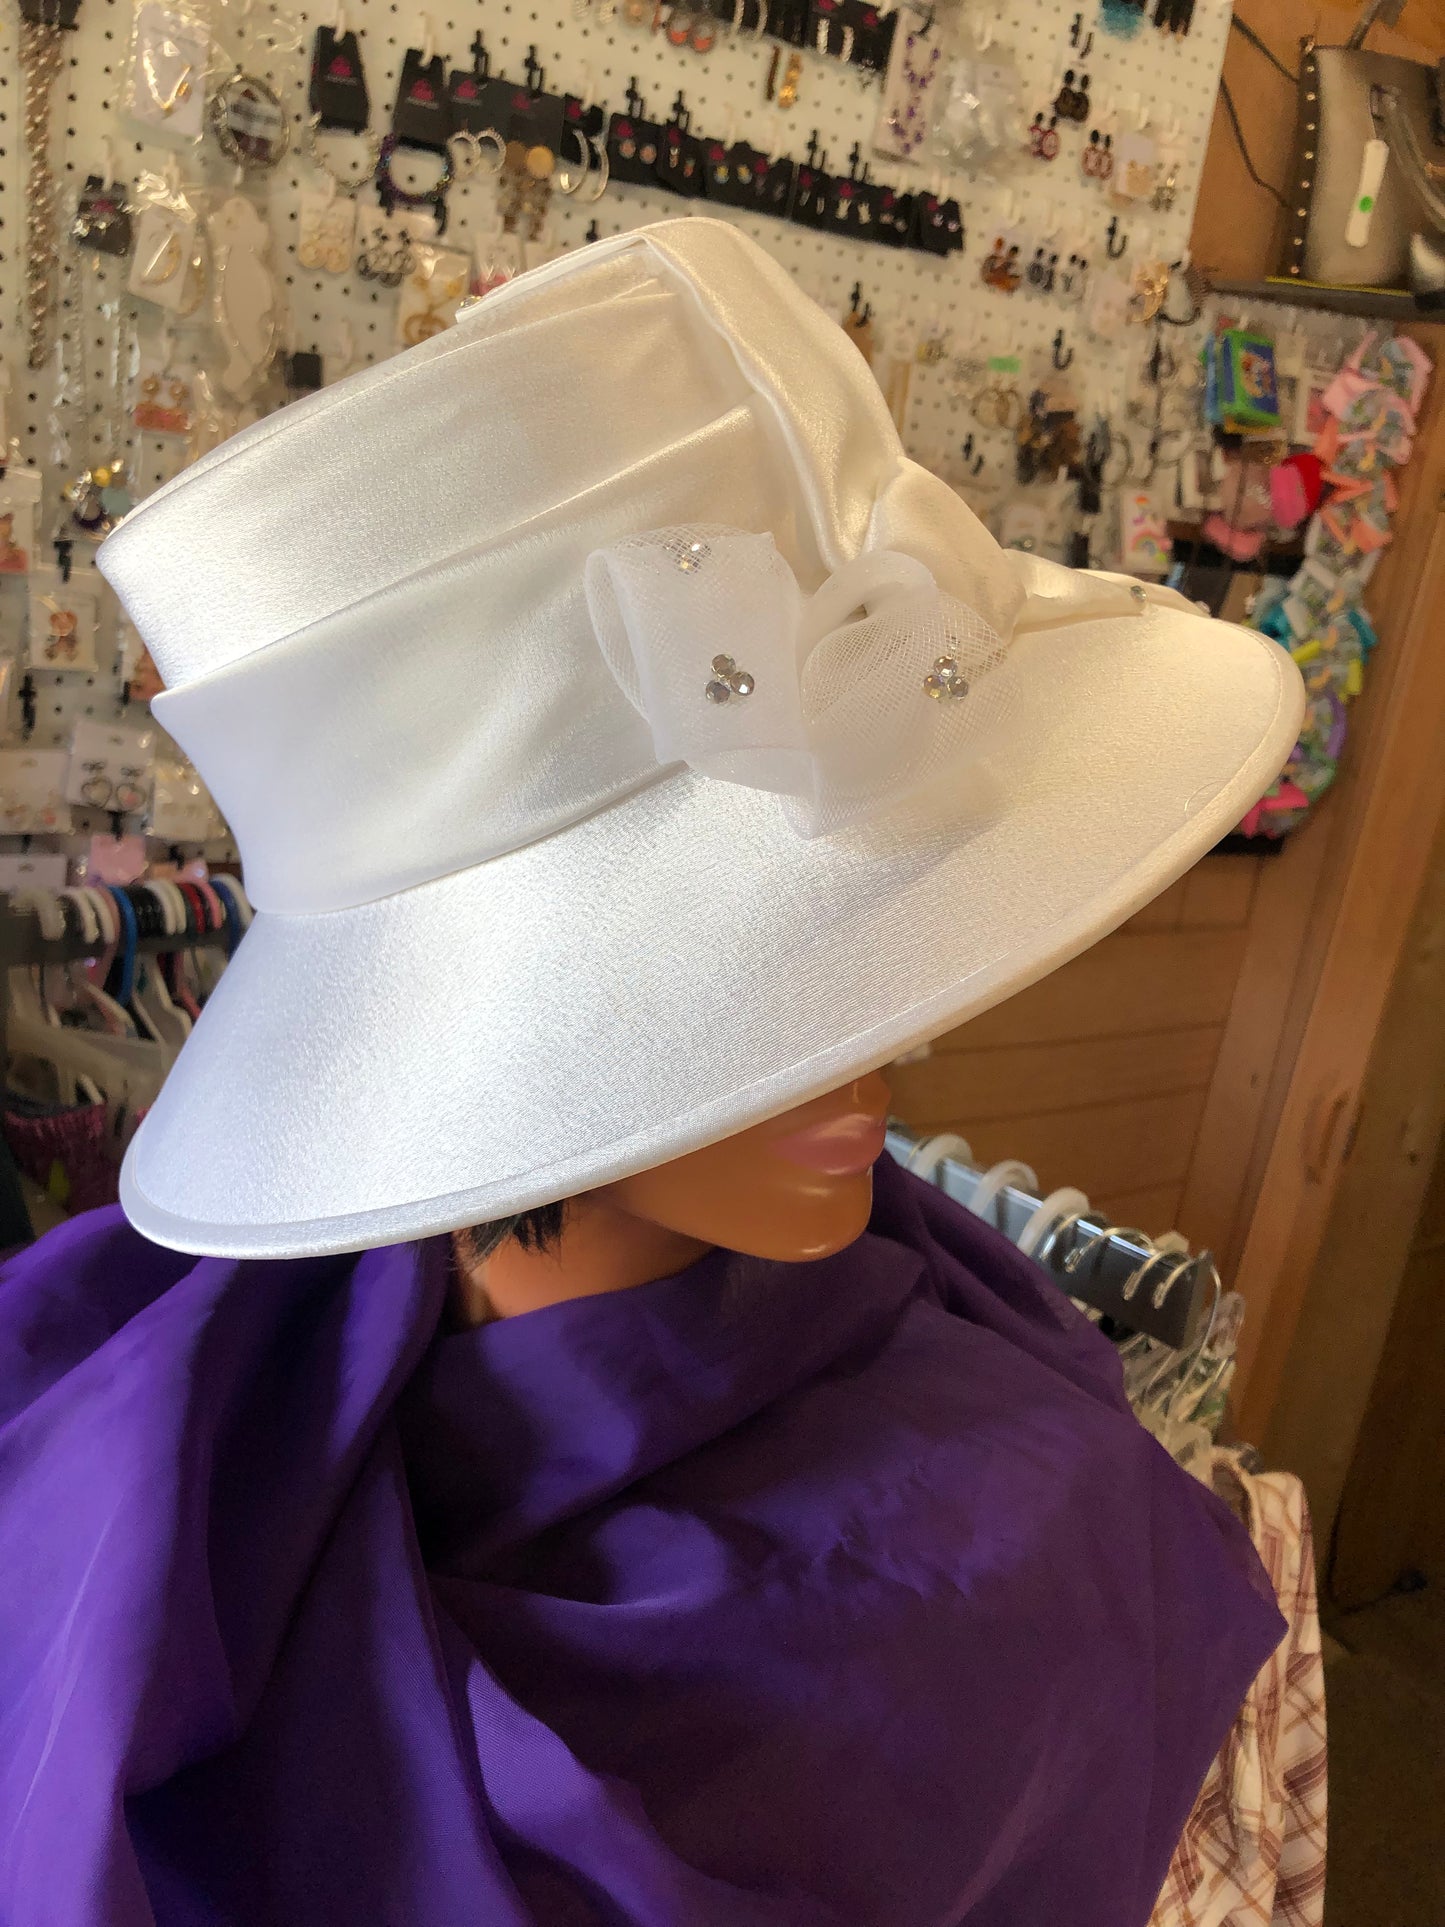 Woman Wide Brim White Hat "Just In Time For Mothers Day"